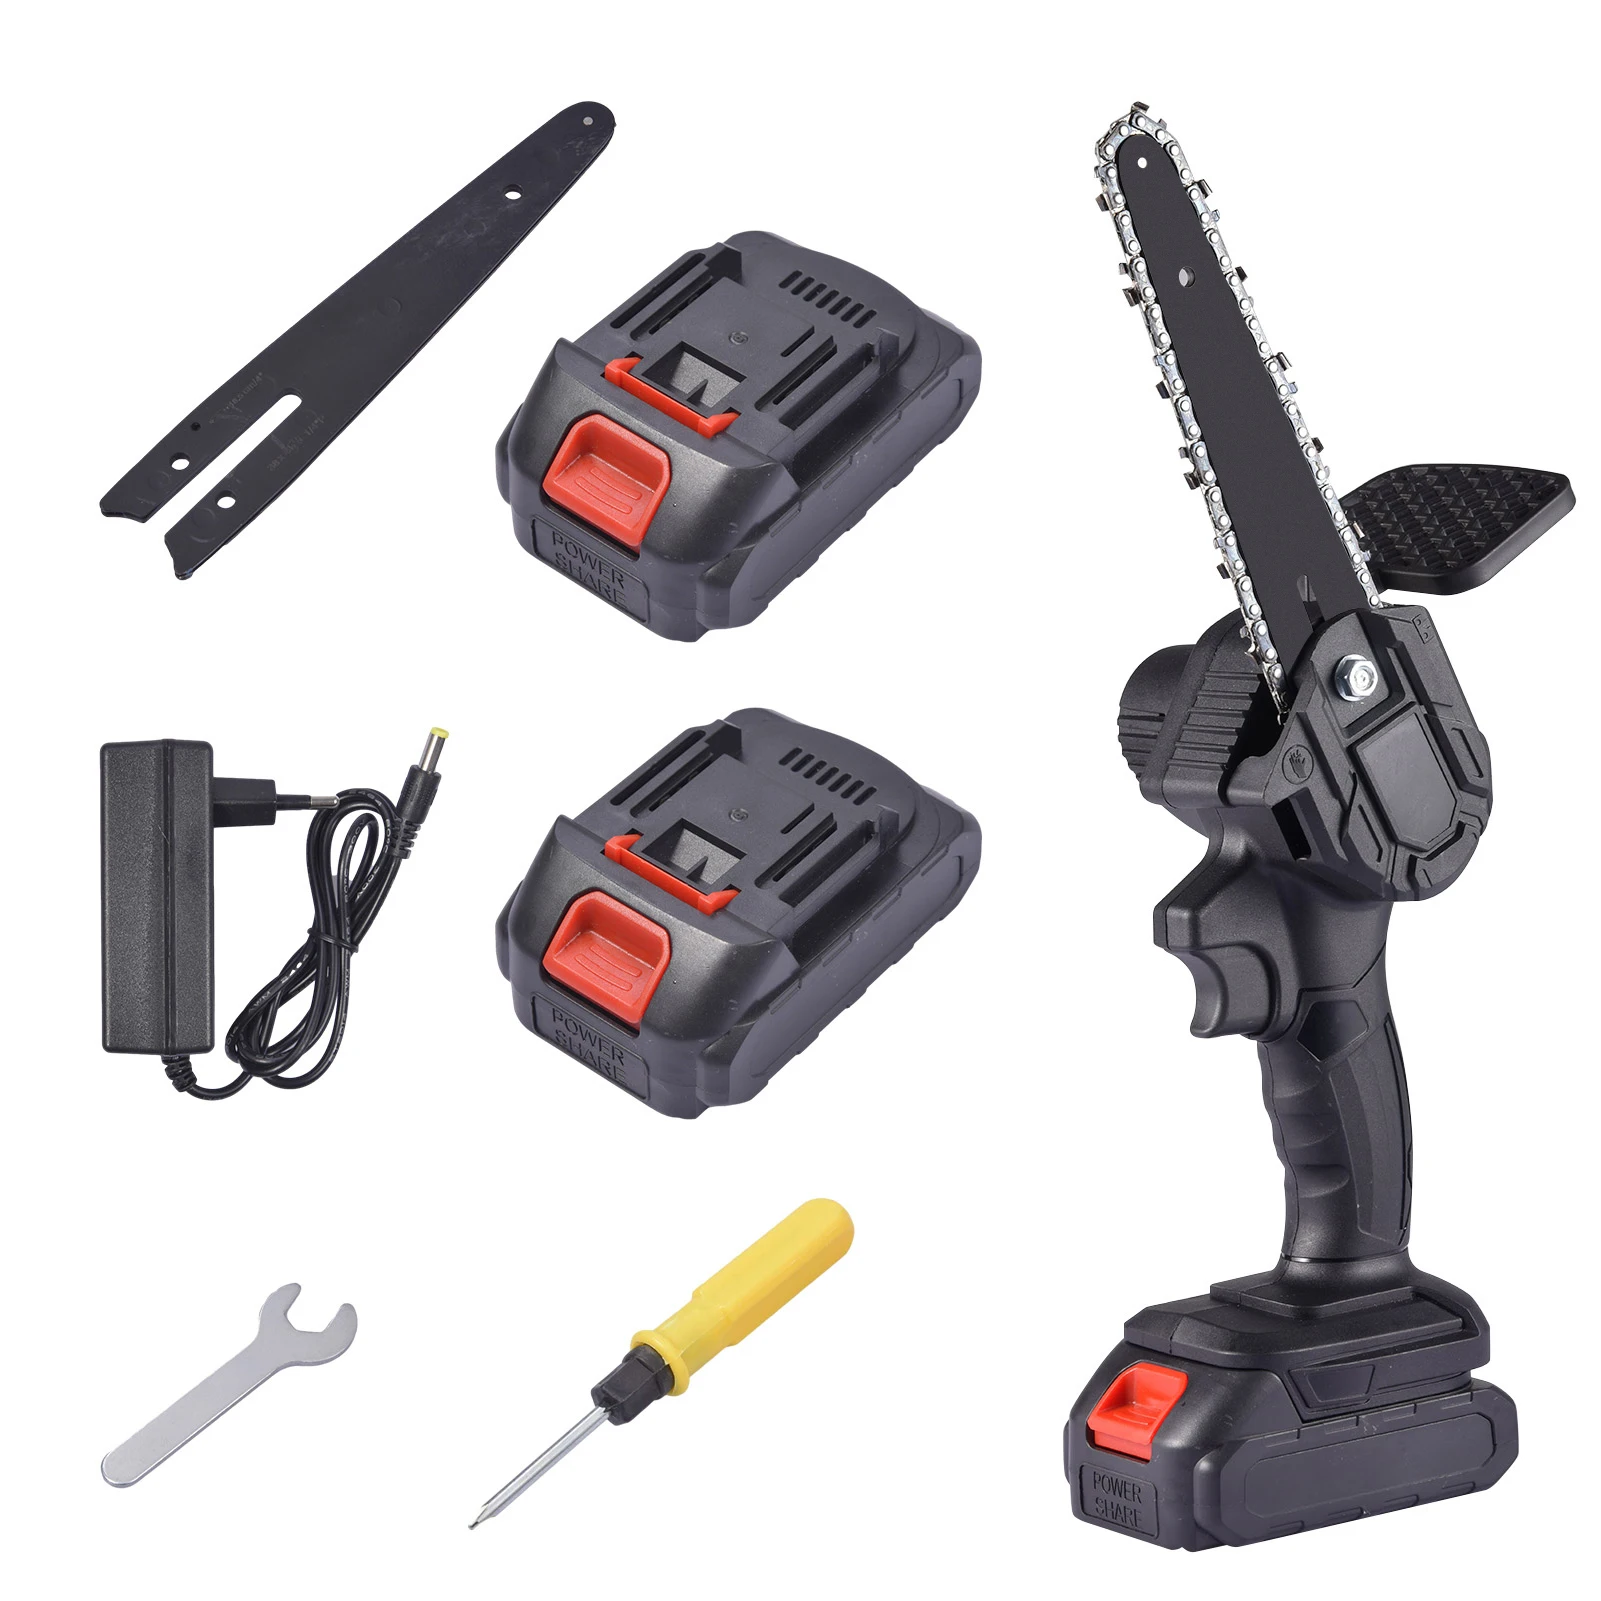 Portable 6 Inch Mini Electric Chainsaw Cordless Handheld Pruning Saw Battery Wood Cutter Home Garden Logging Power Tool